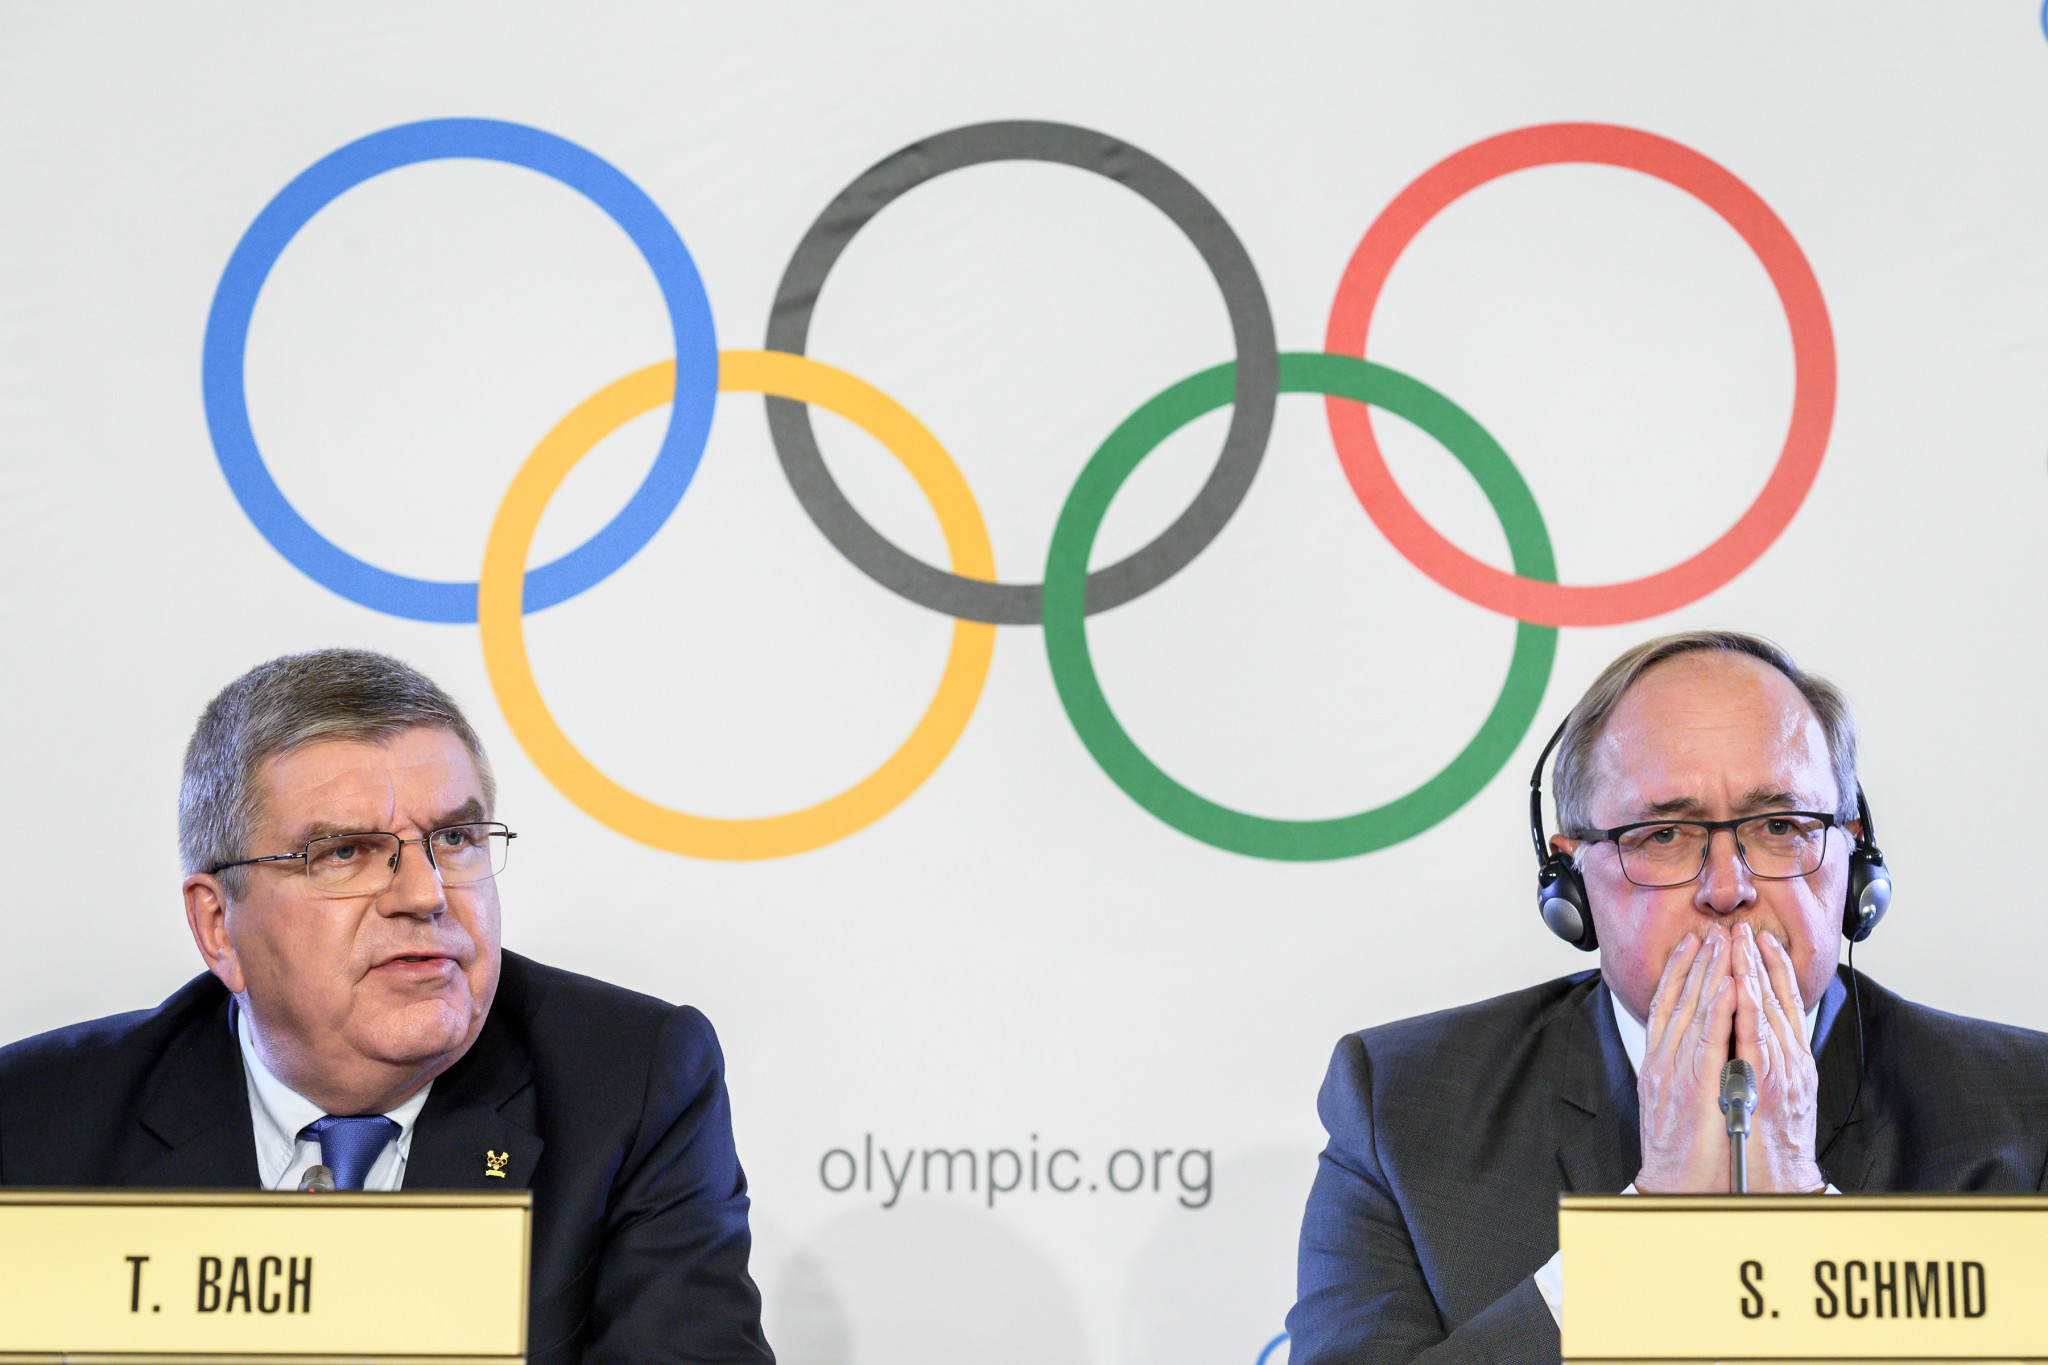 IOC President Thomas Bach, left, alongside Samuel Schmid during the announcement today ©Getty Images